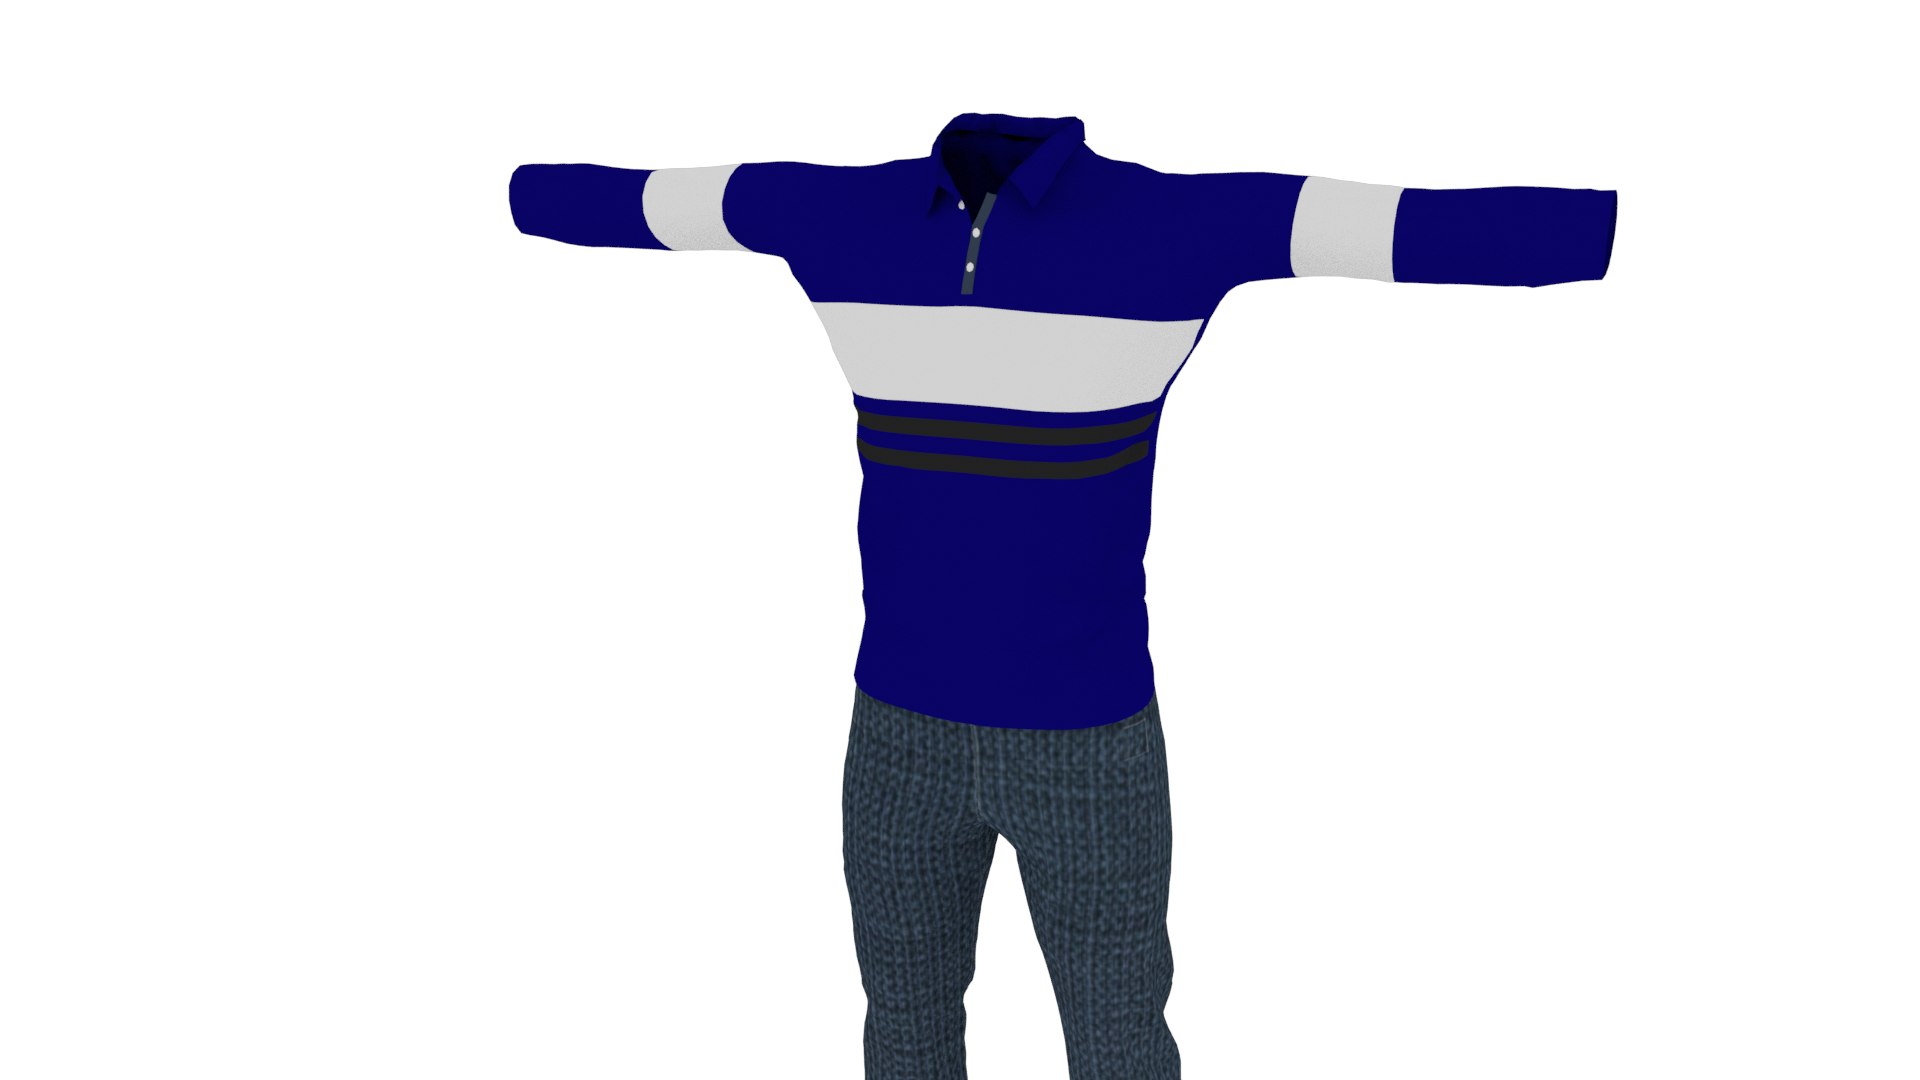 Man Outfit model - TurboSquid 2109882